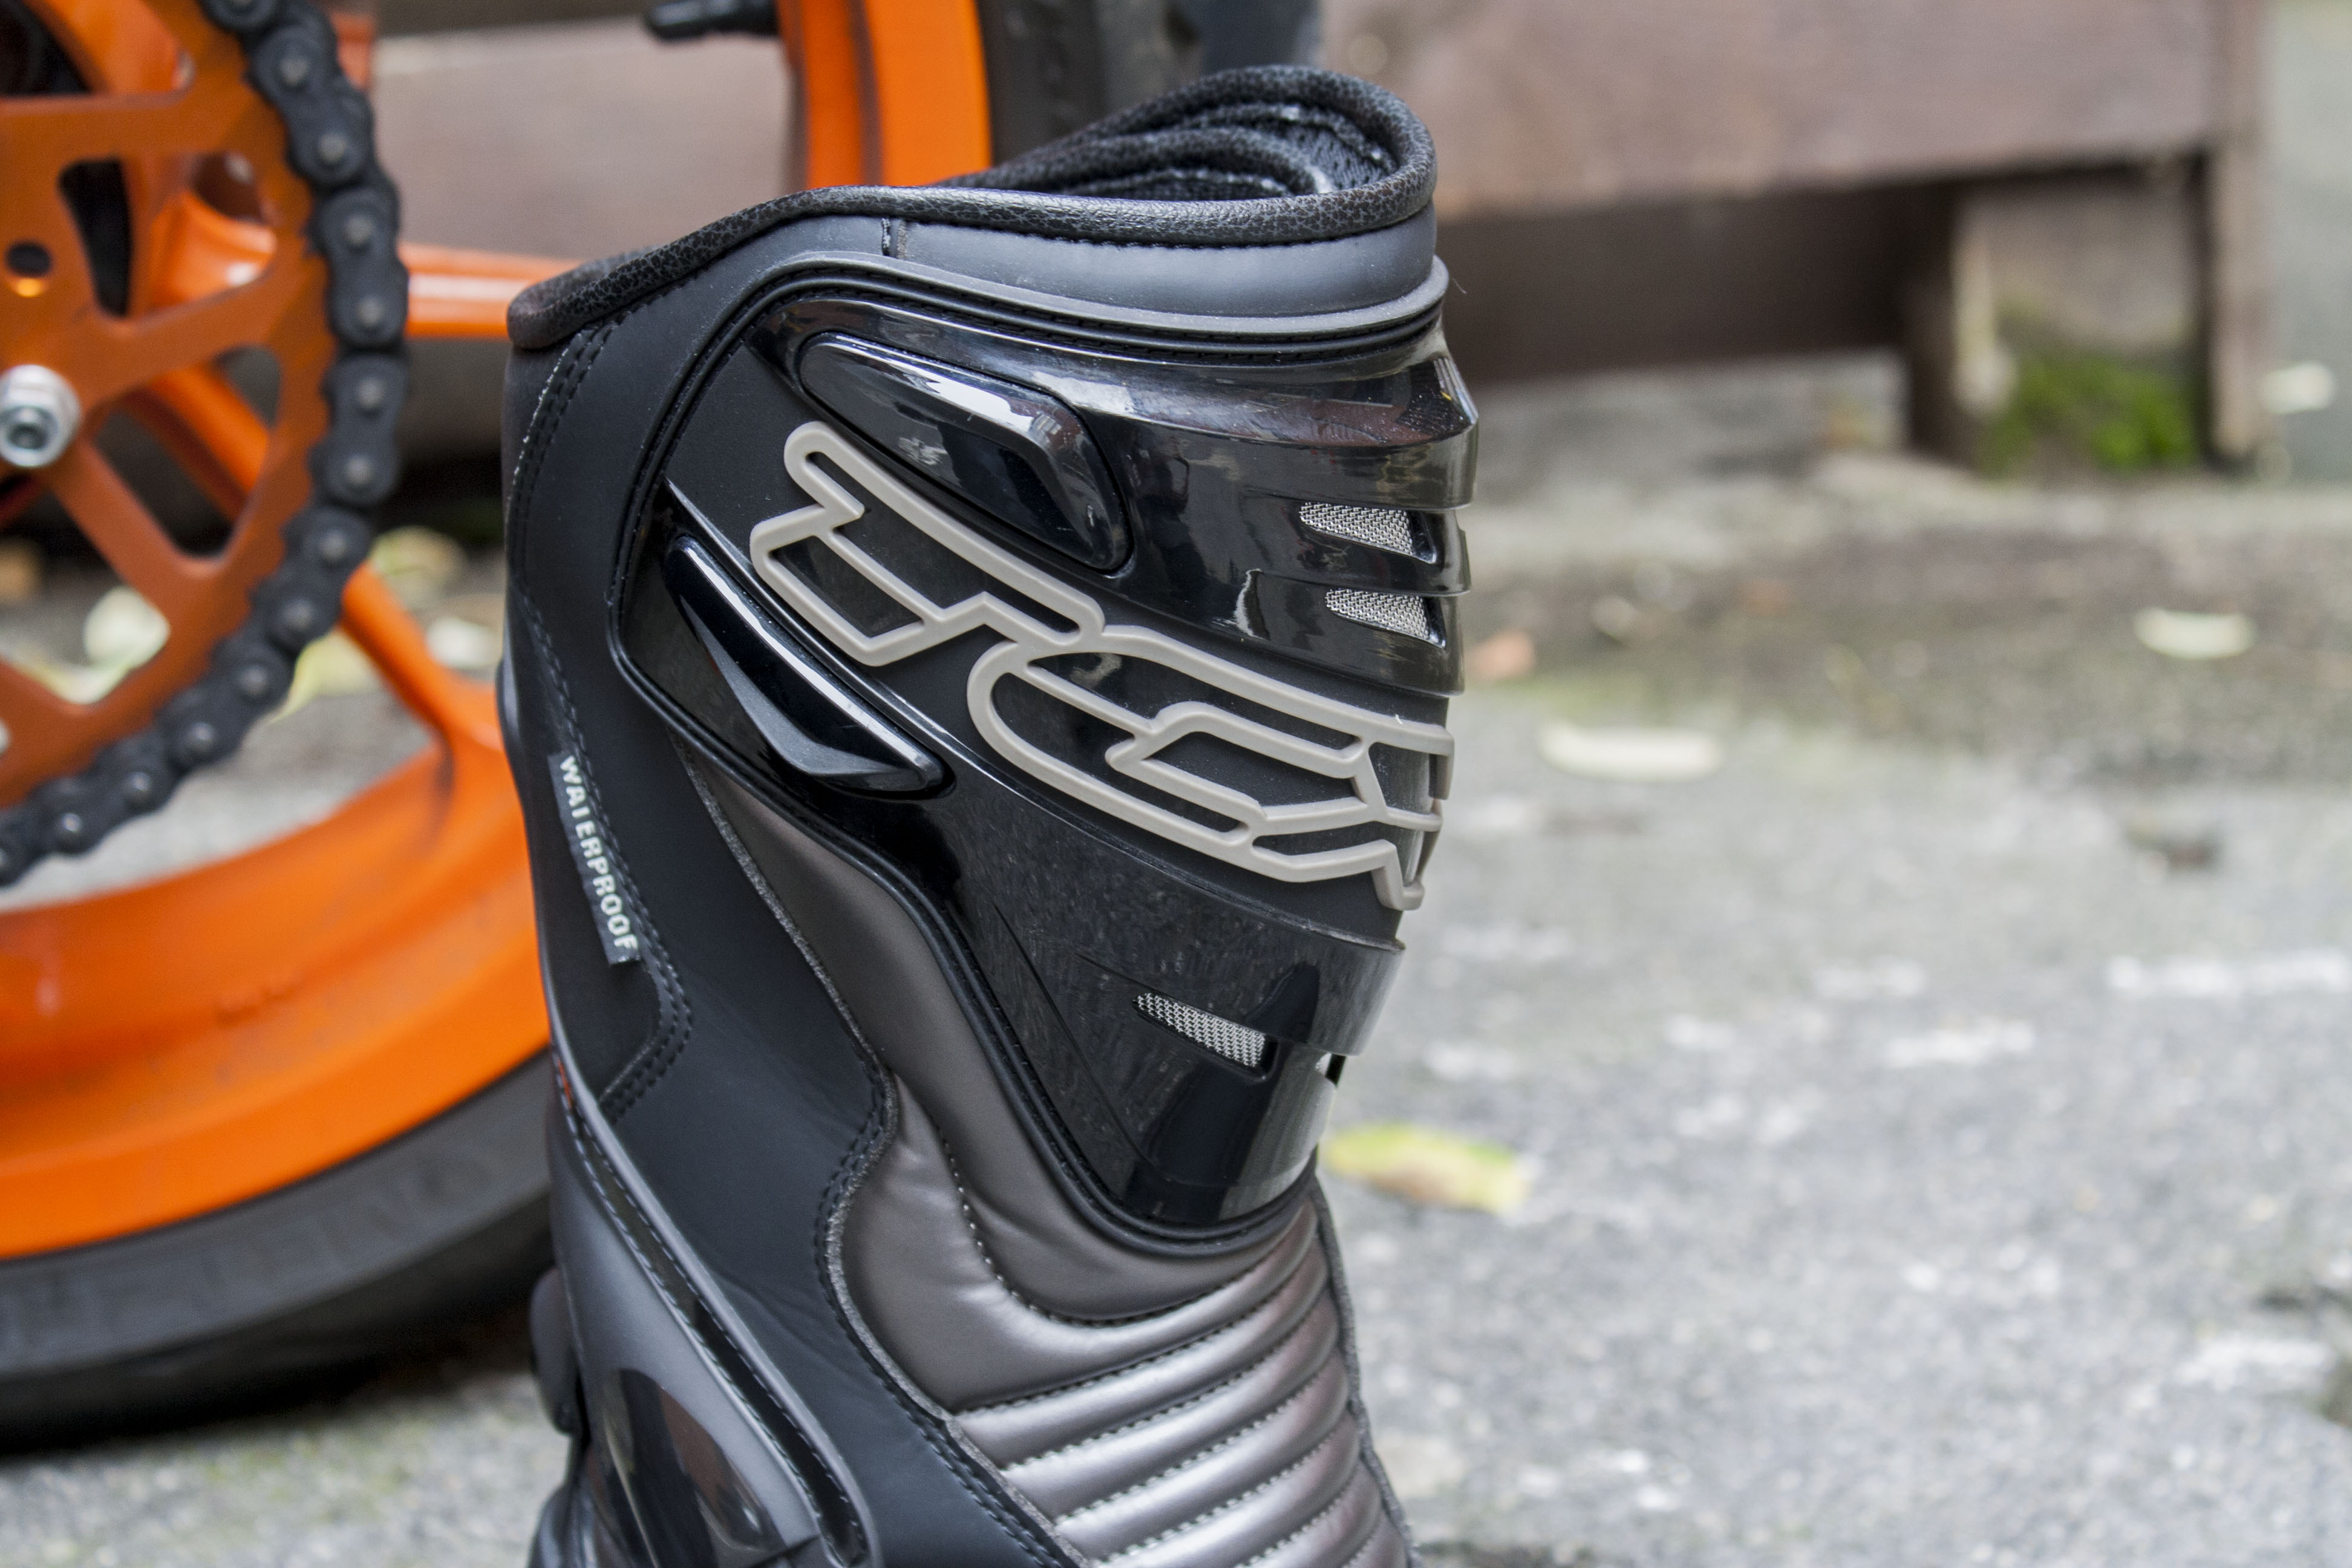 Review: TCX S-Speed Waterproof boots - £149.99